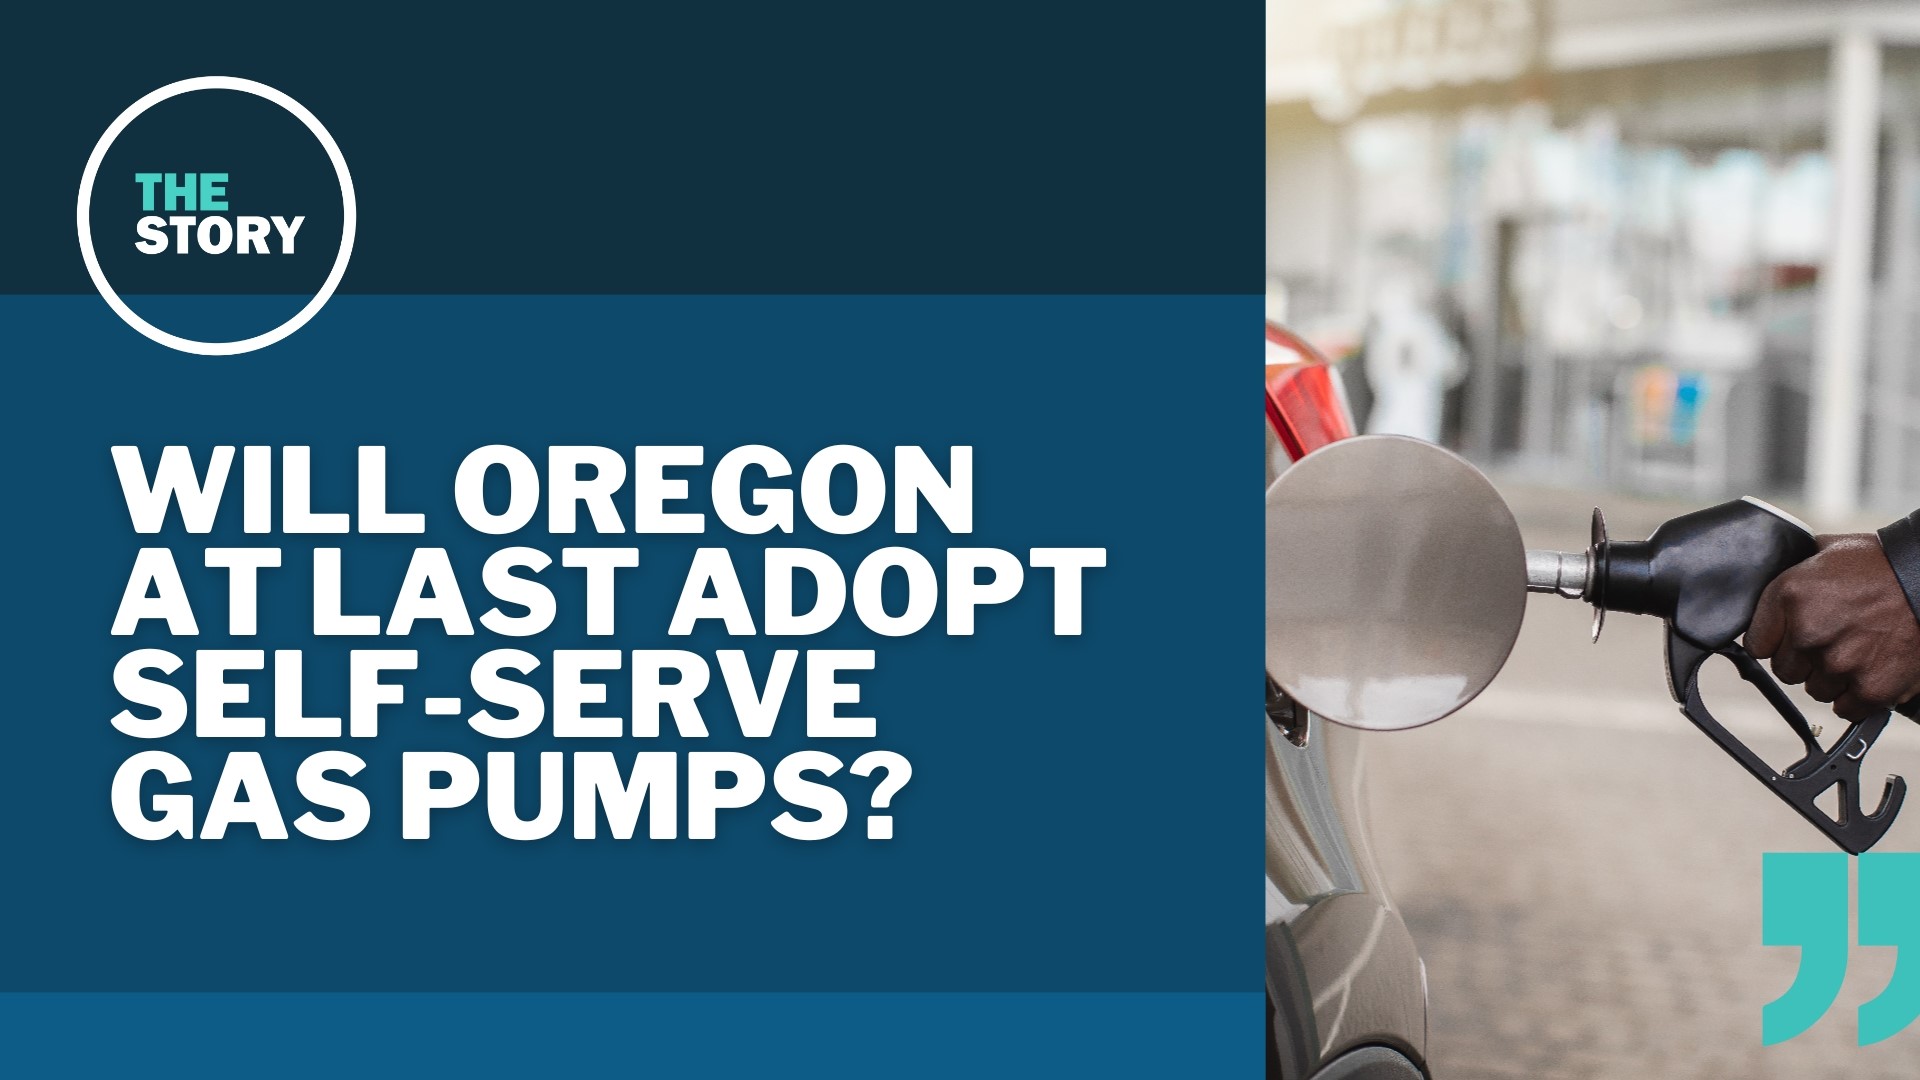 Oregon is one of only two states where an attendant almost always pumps gas. That could finally change in this legislative session.